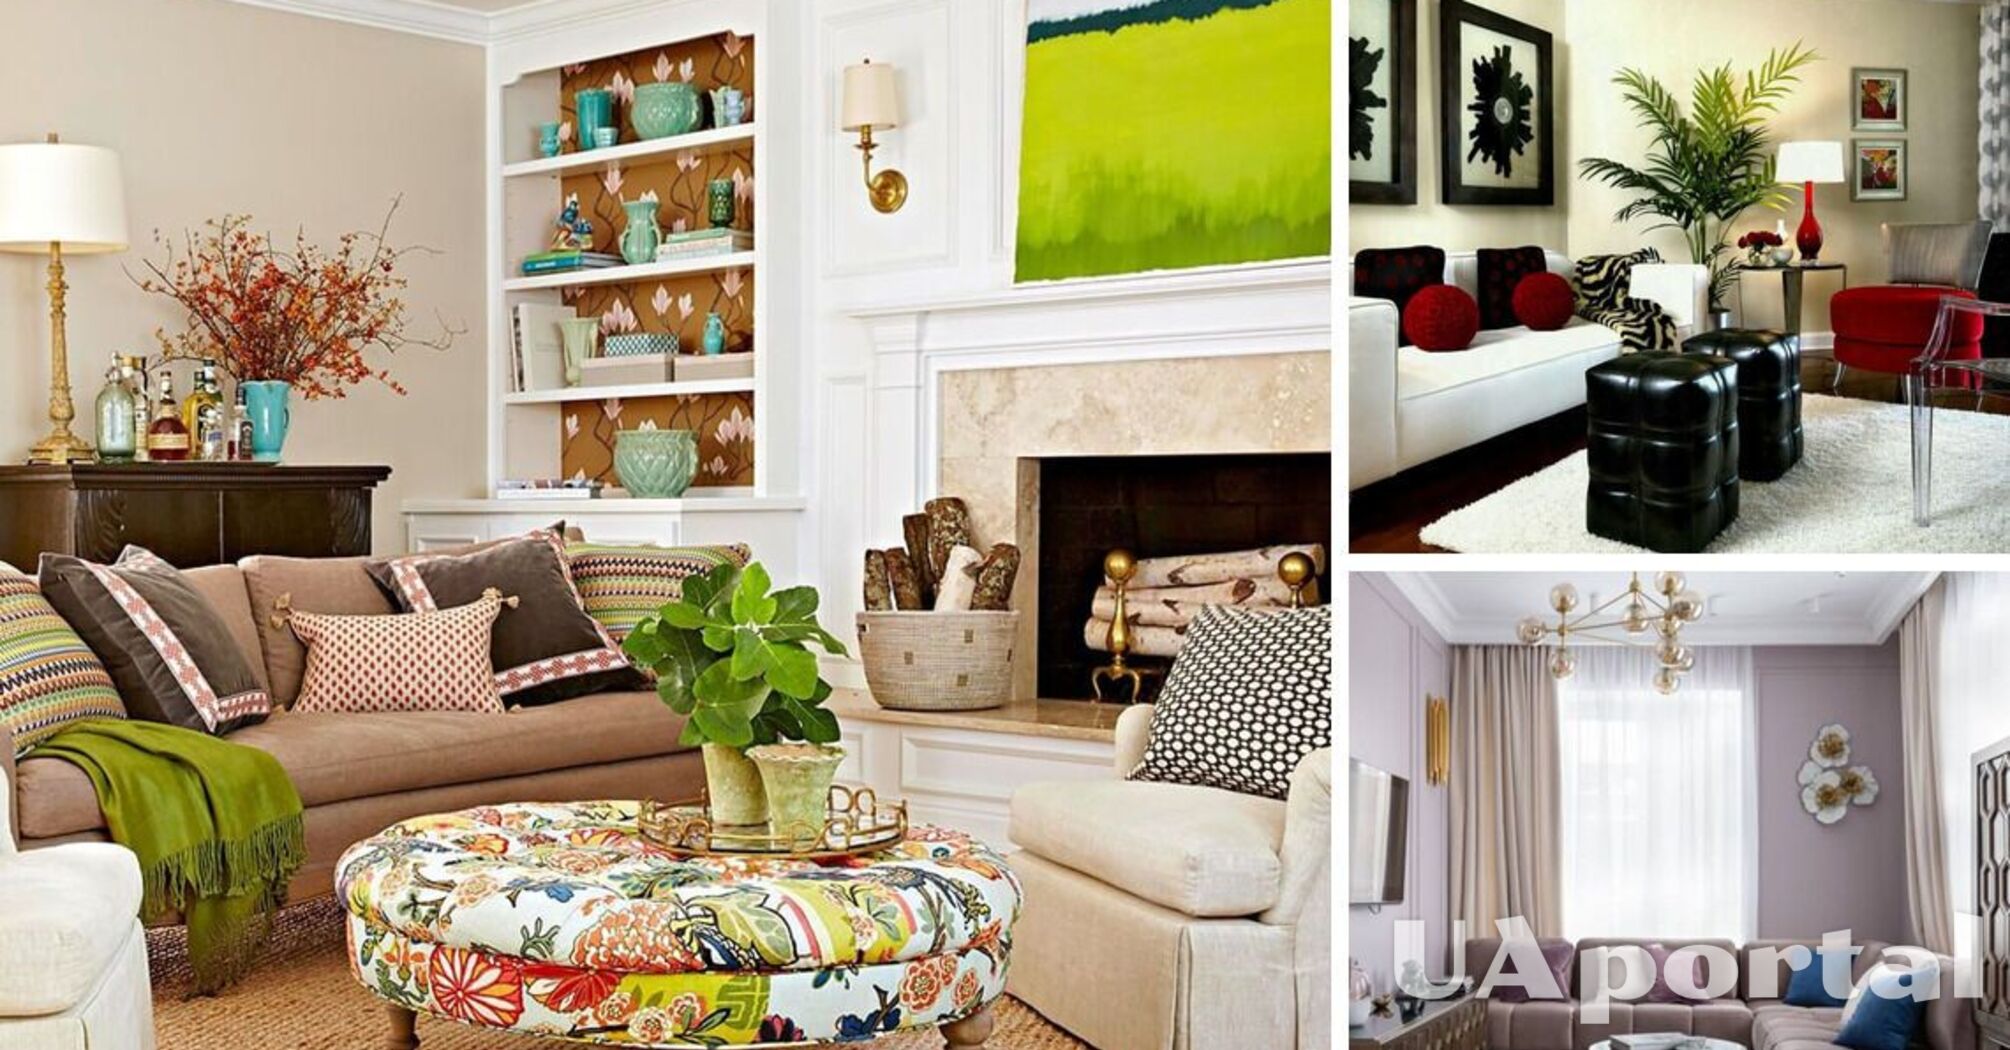 Helpful Tips On How To Arrange Furniture In A Room To Use The Space